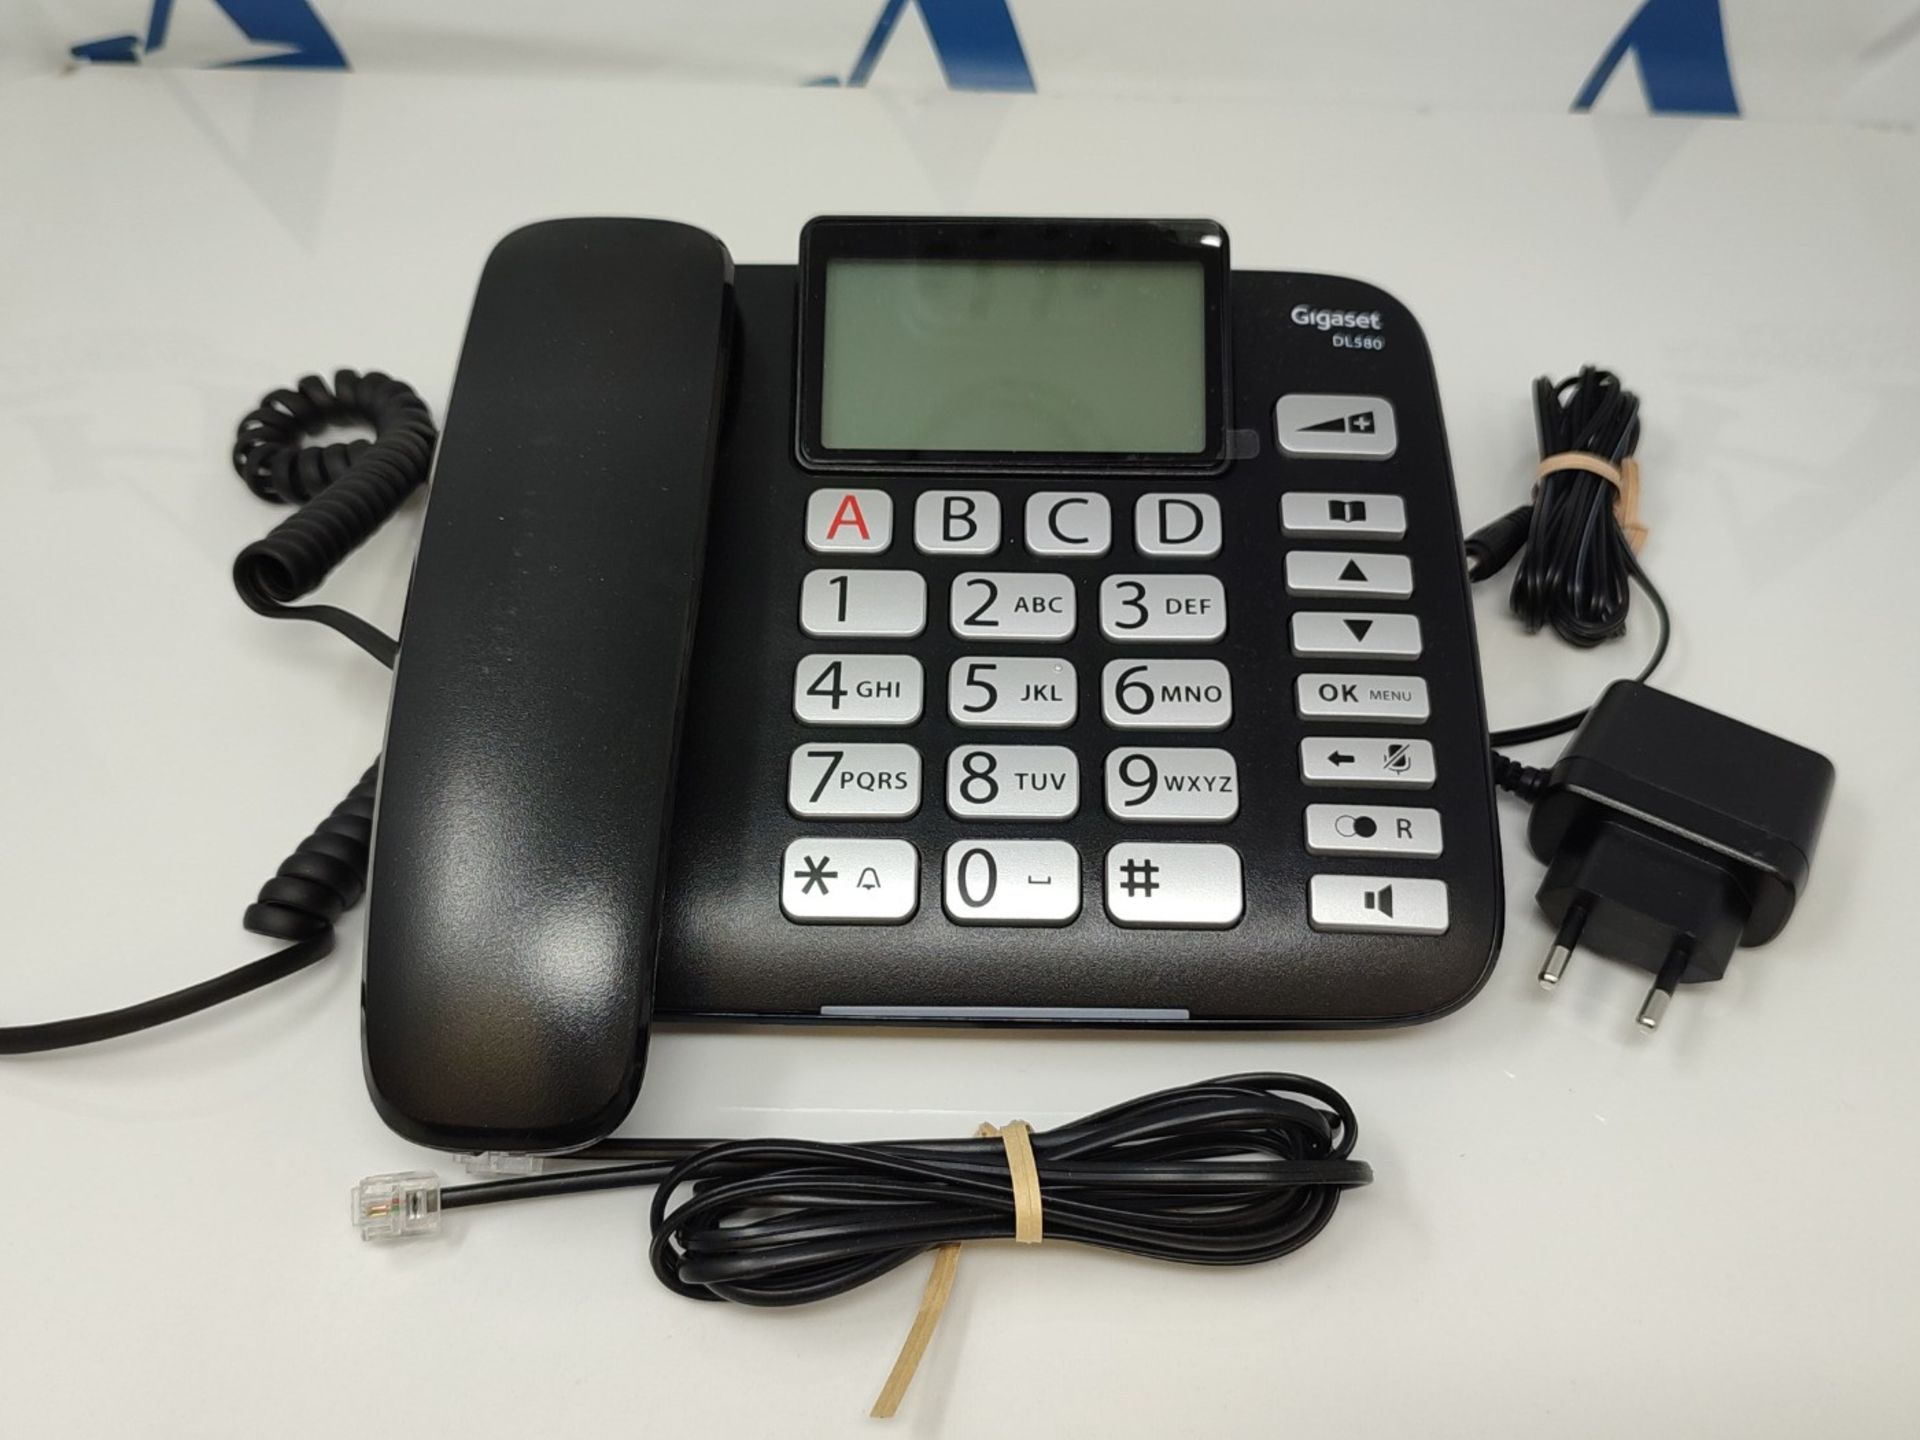 Gigaset DL580 Corded Telephone Black [French Version] - Image 2 of 3